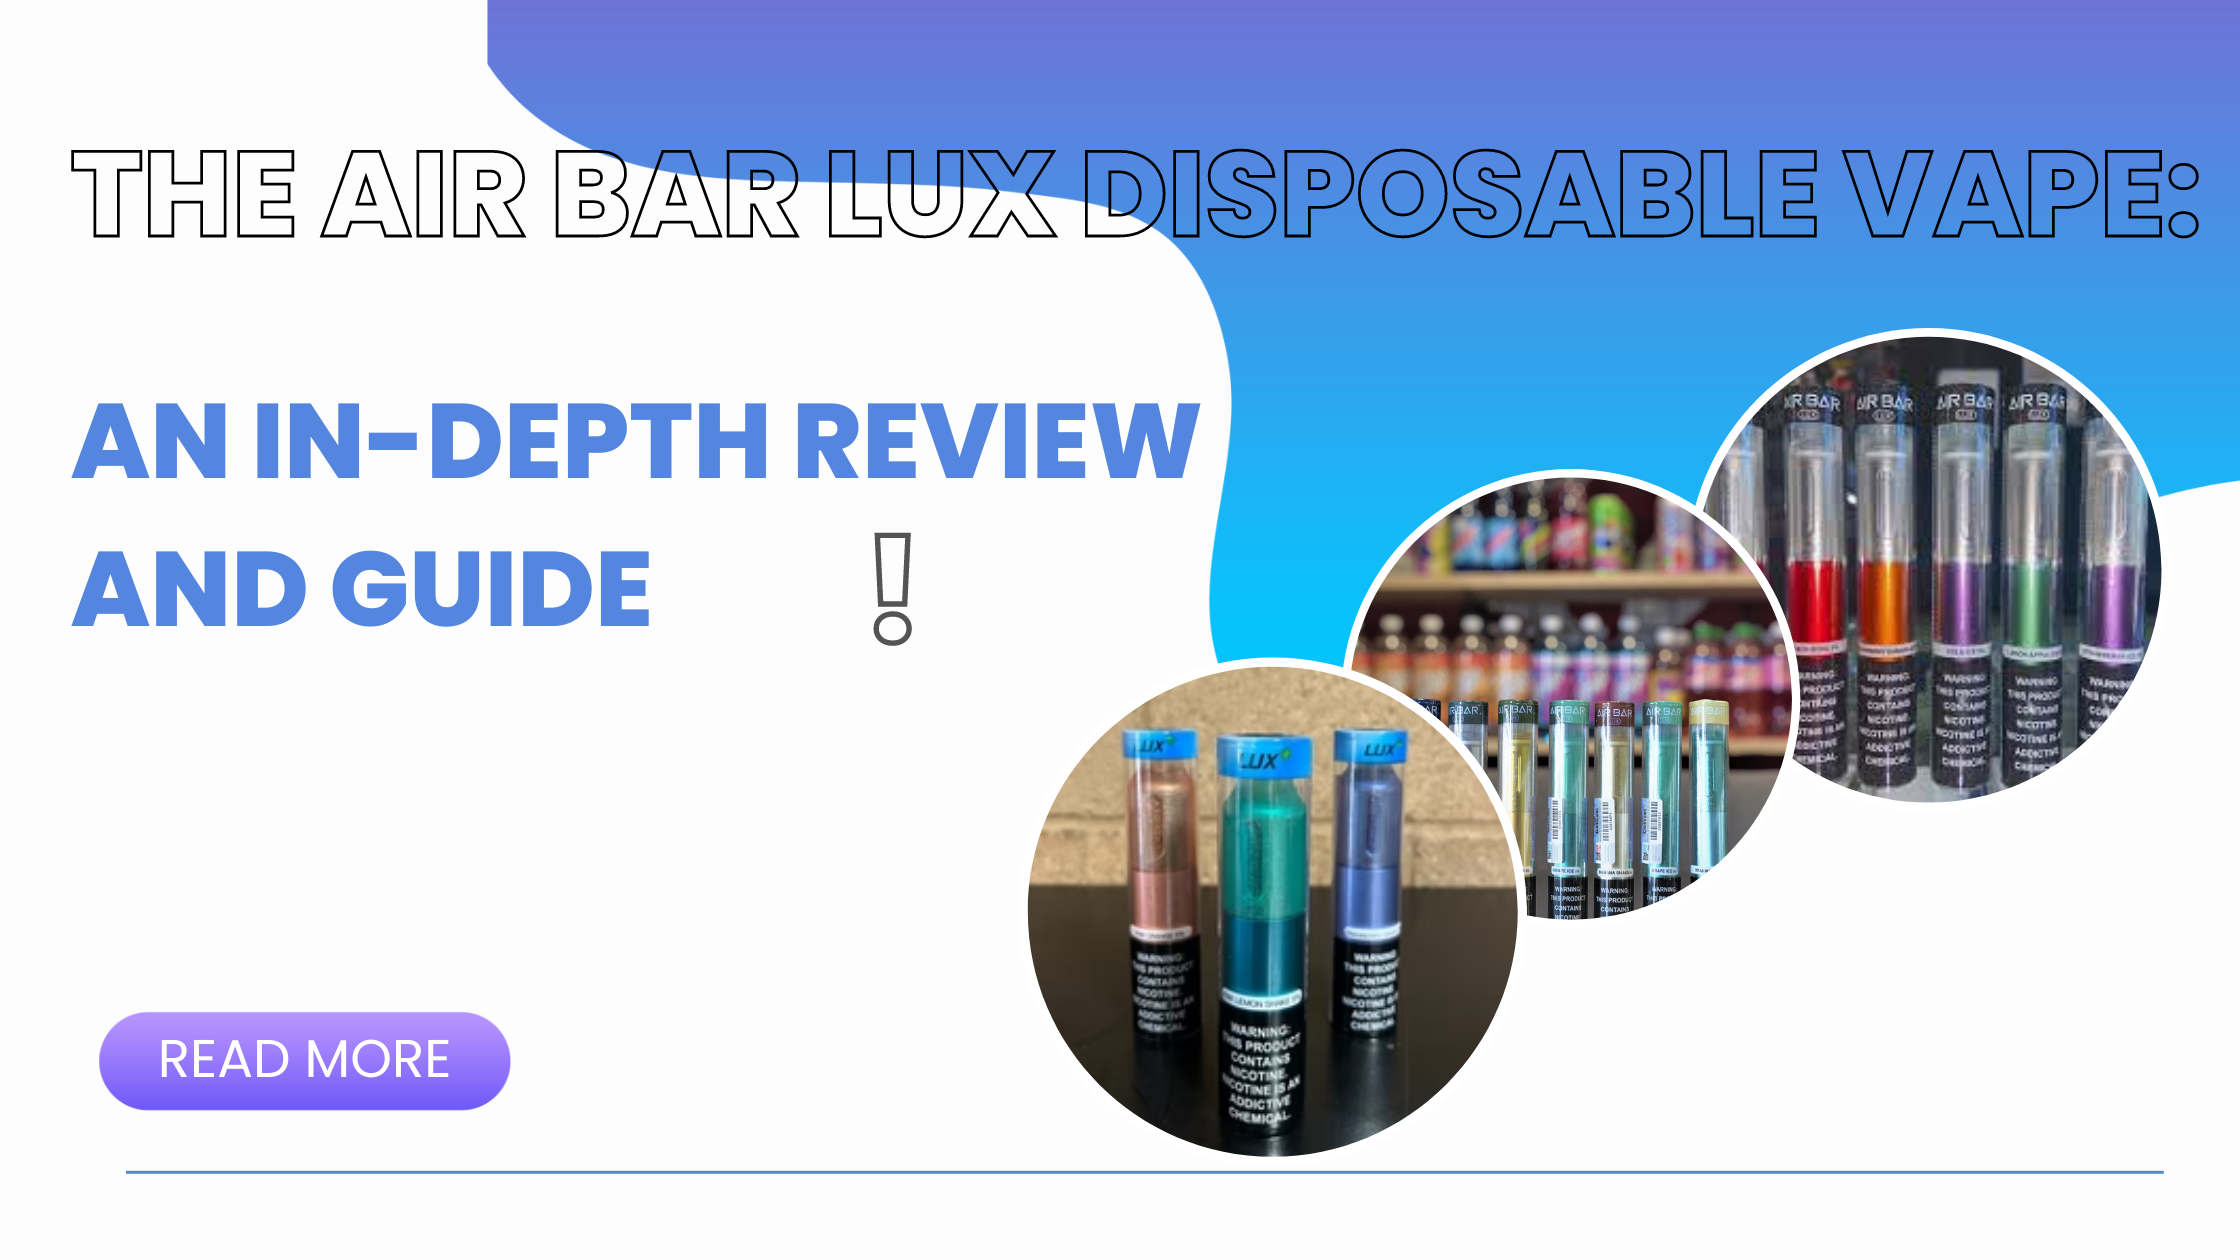 The Air Bar Lux Disposable Vape: An In-Depth Review and Guide